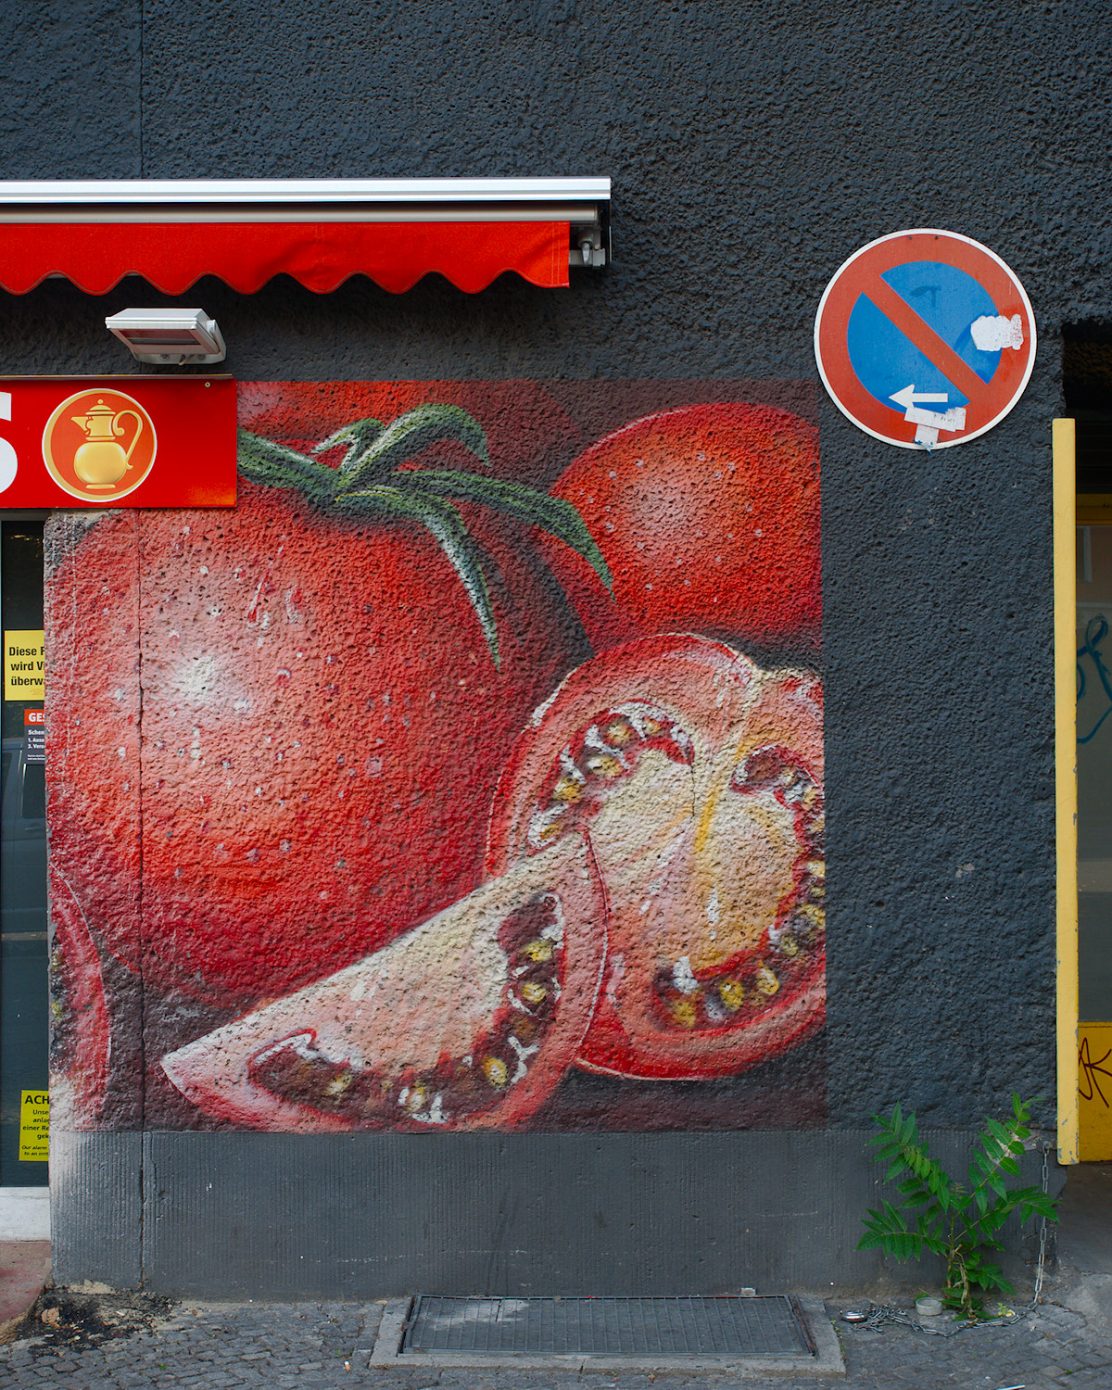 Oversized Tomatoes. Tagged with Mural